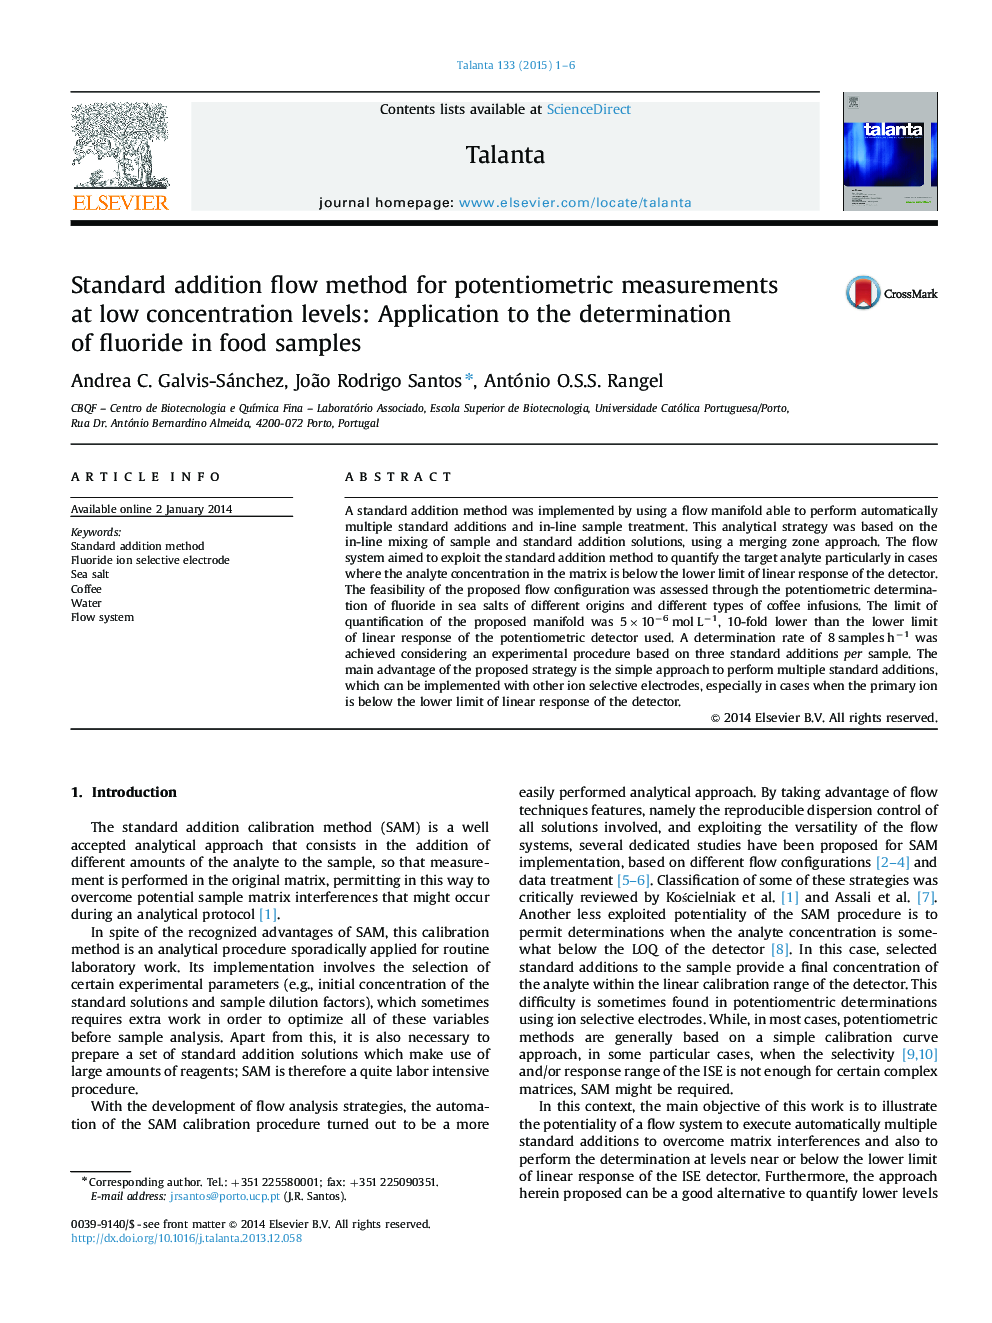 Standard addition flow method for potentiometric measurements at low concentration levels: Application to the determination of fluoride in food samples